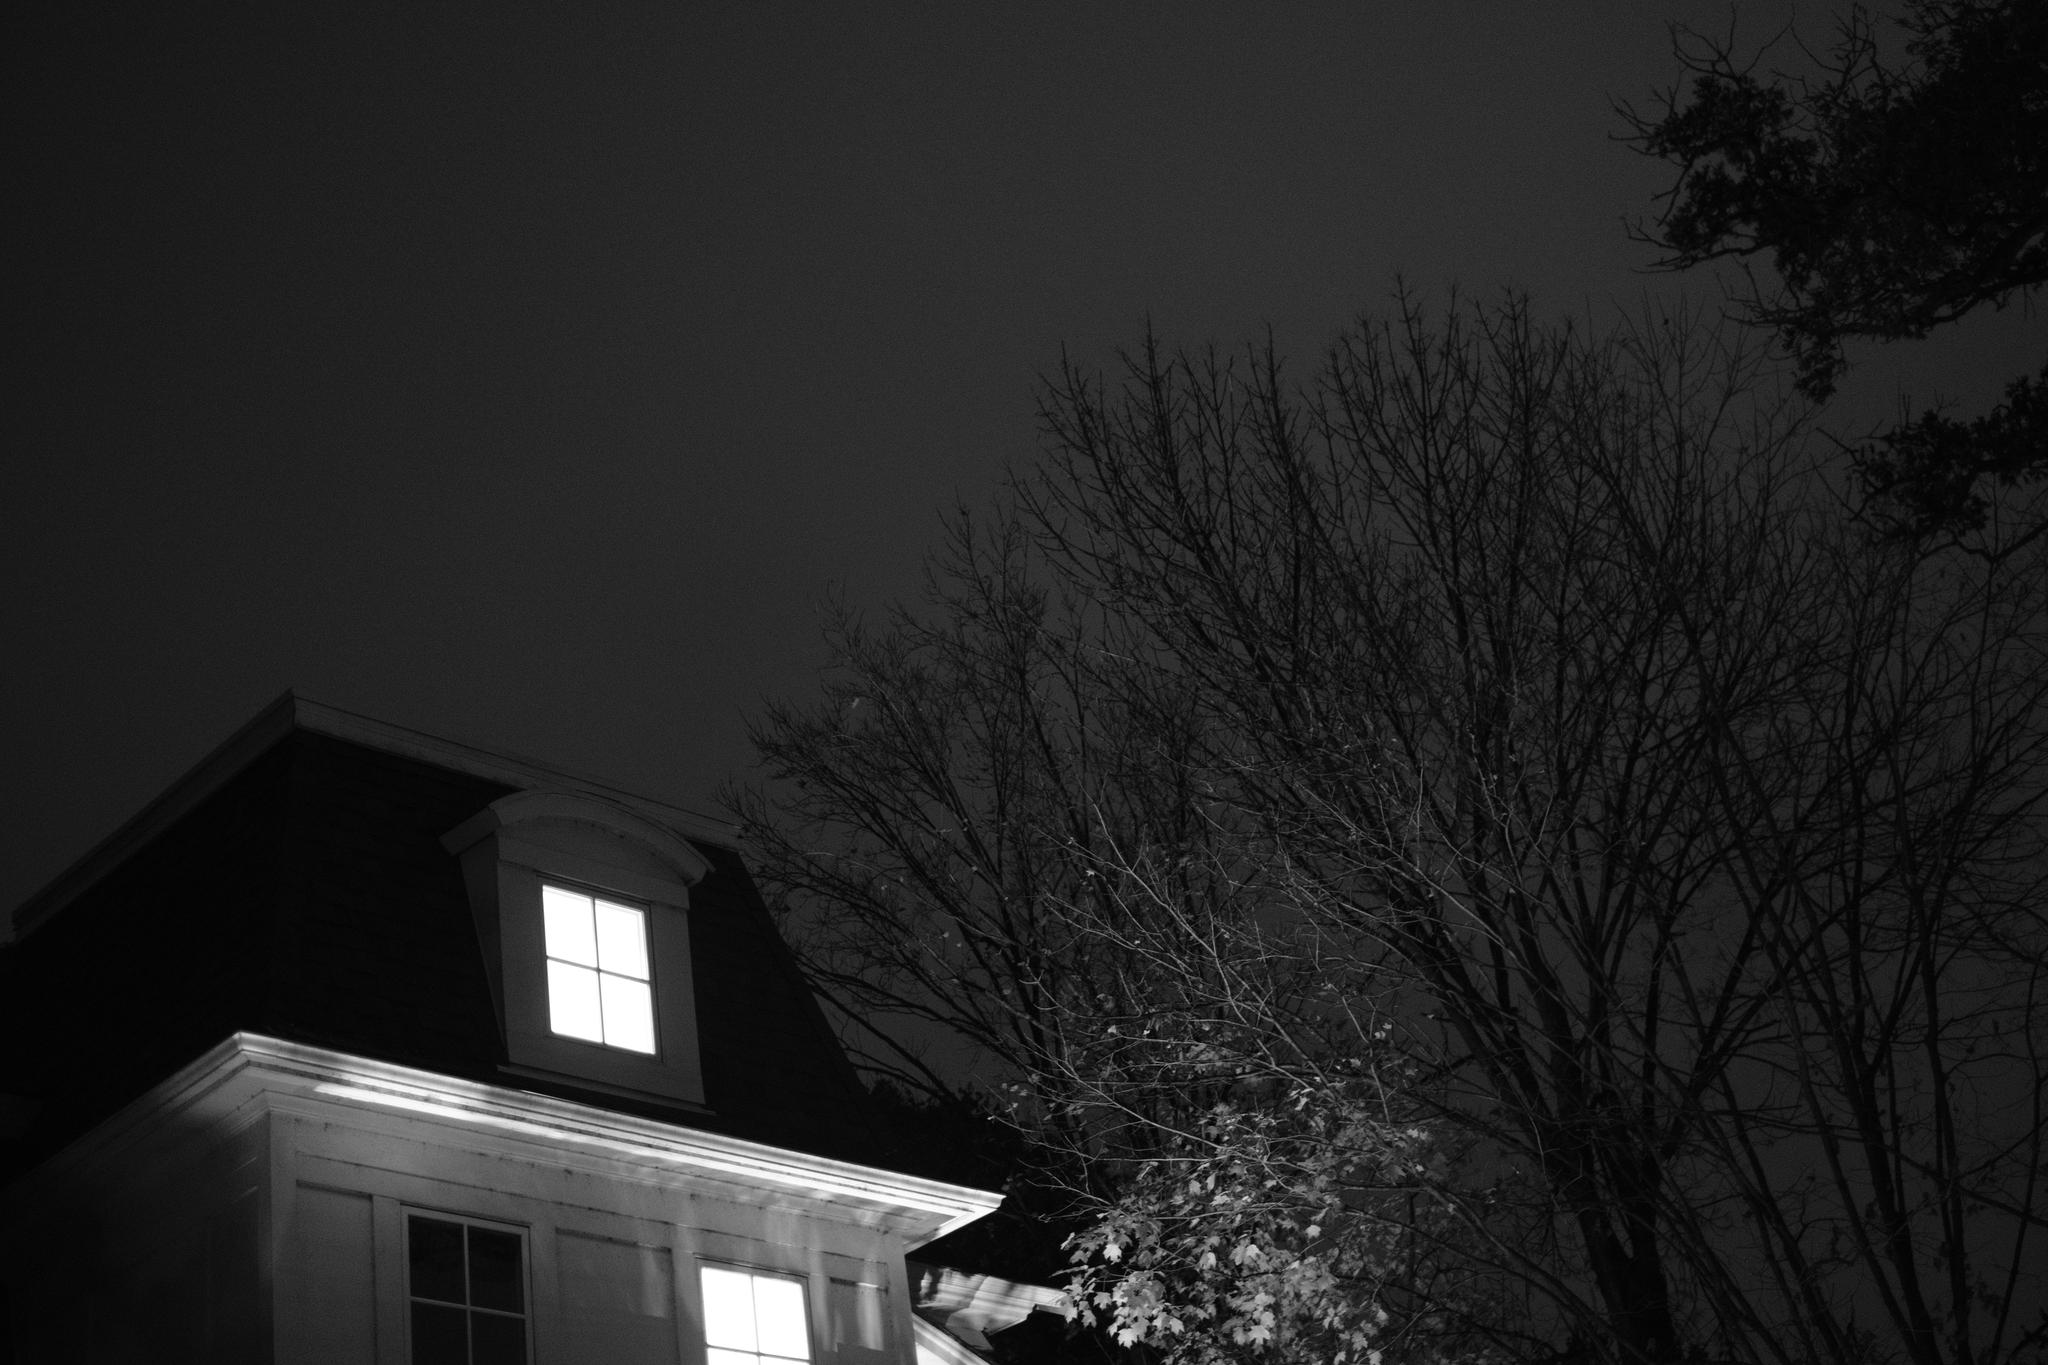 A dark, nighttime scene featuring the upper part of a house with illuminated windows and bare trees in the background